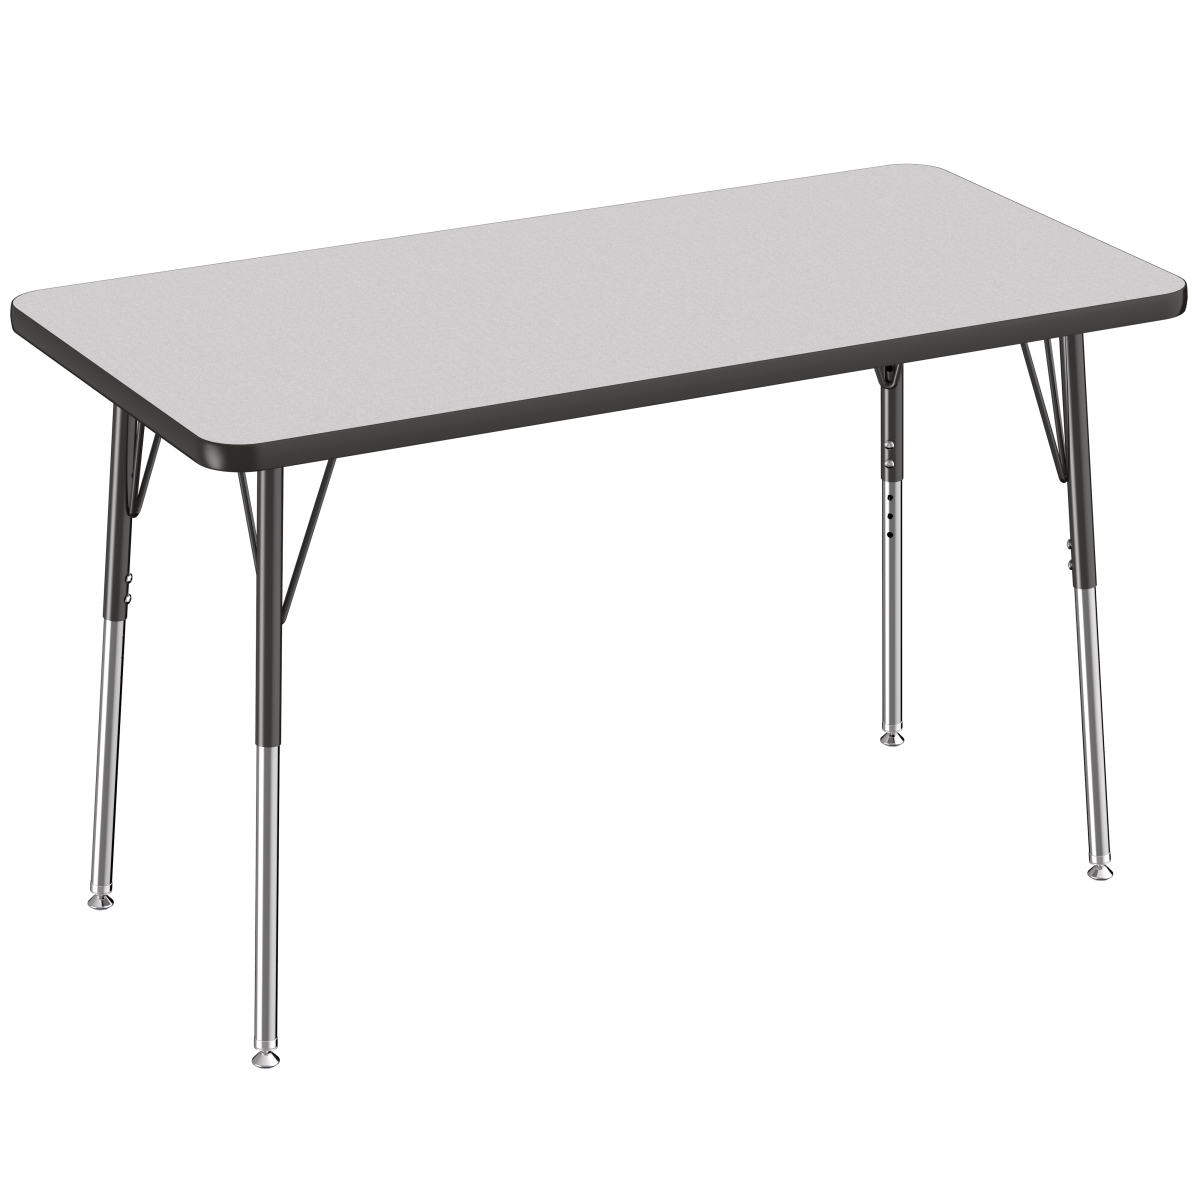 10007-gybk 24 X 48 In. Rectangle T-mold Adjustable Activity Table With Standard Swivel - Grey & Black